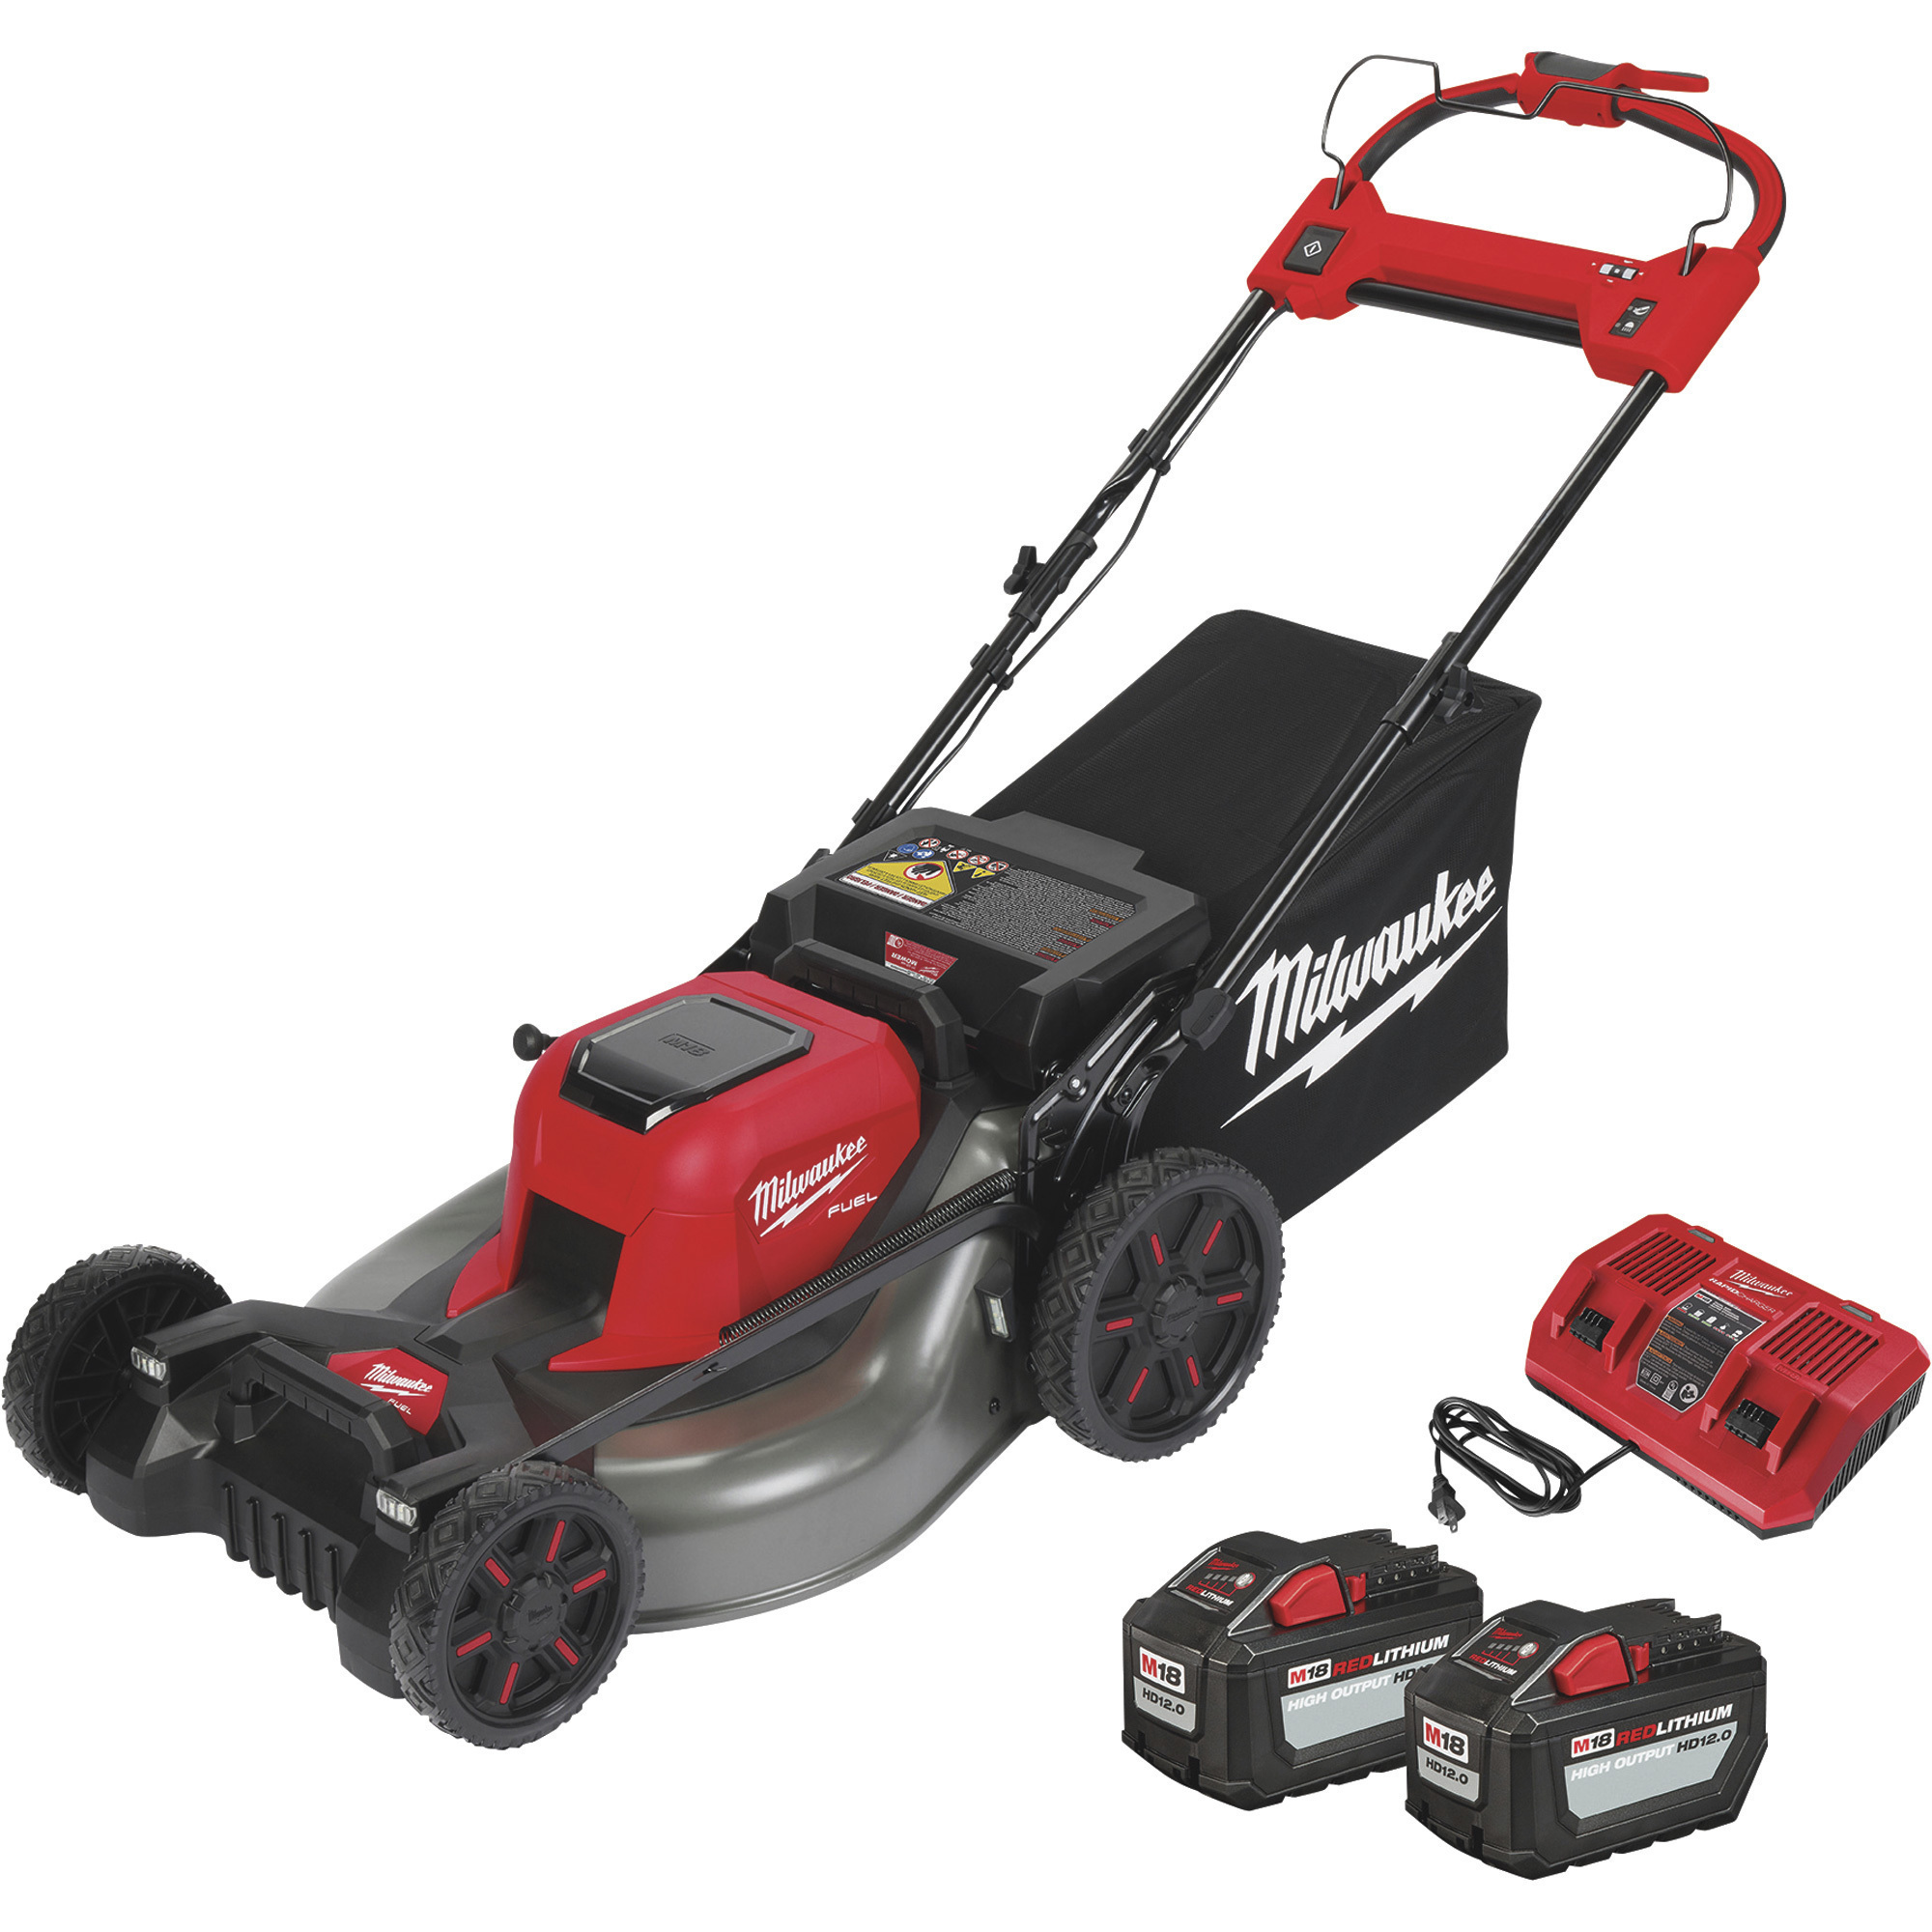 Milwaukee M18 FUEL Self-Propelled Dual Battery Cordless Lawn Mower Kit, 21Inch Deck, Includes Two 12.0 Ah Battery Packs and M18 Dual Bay Rapid Charger